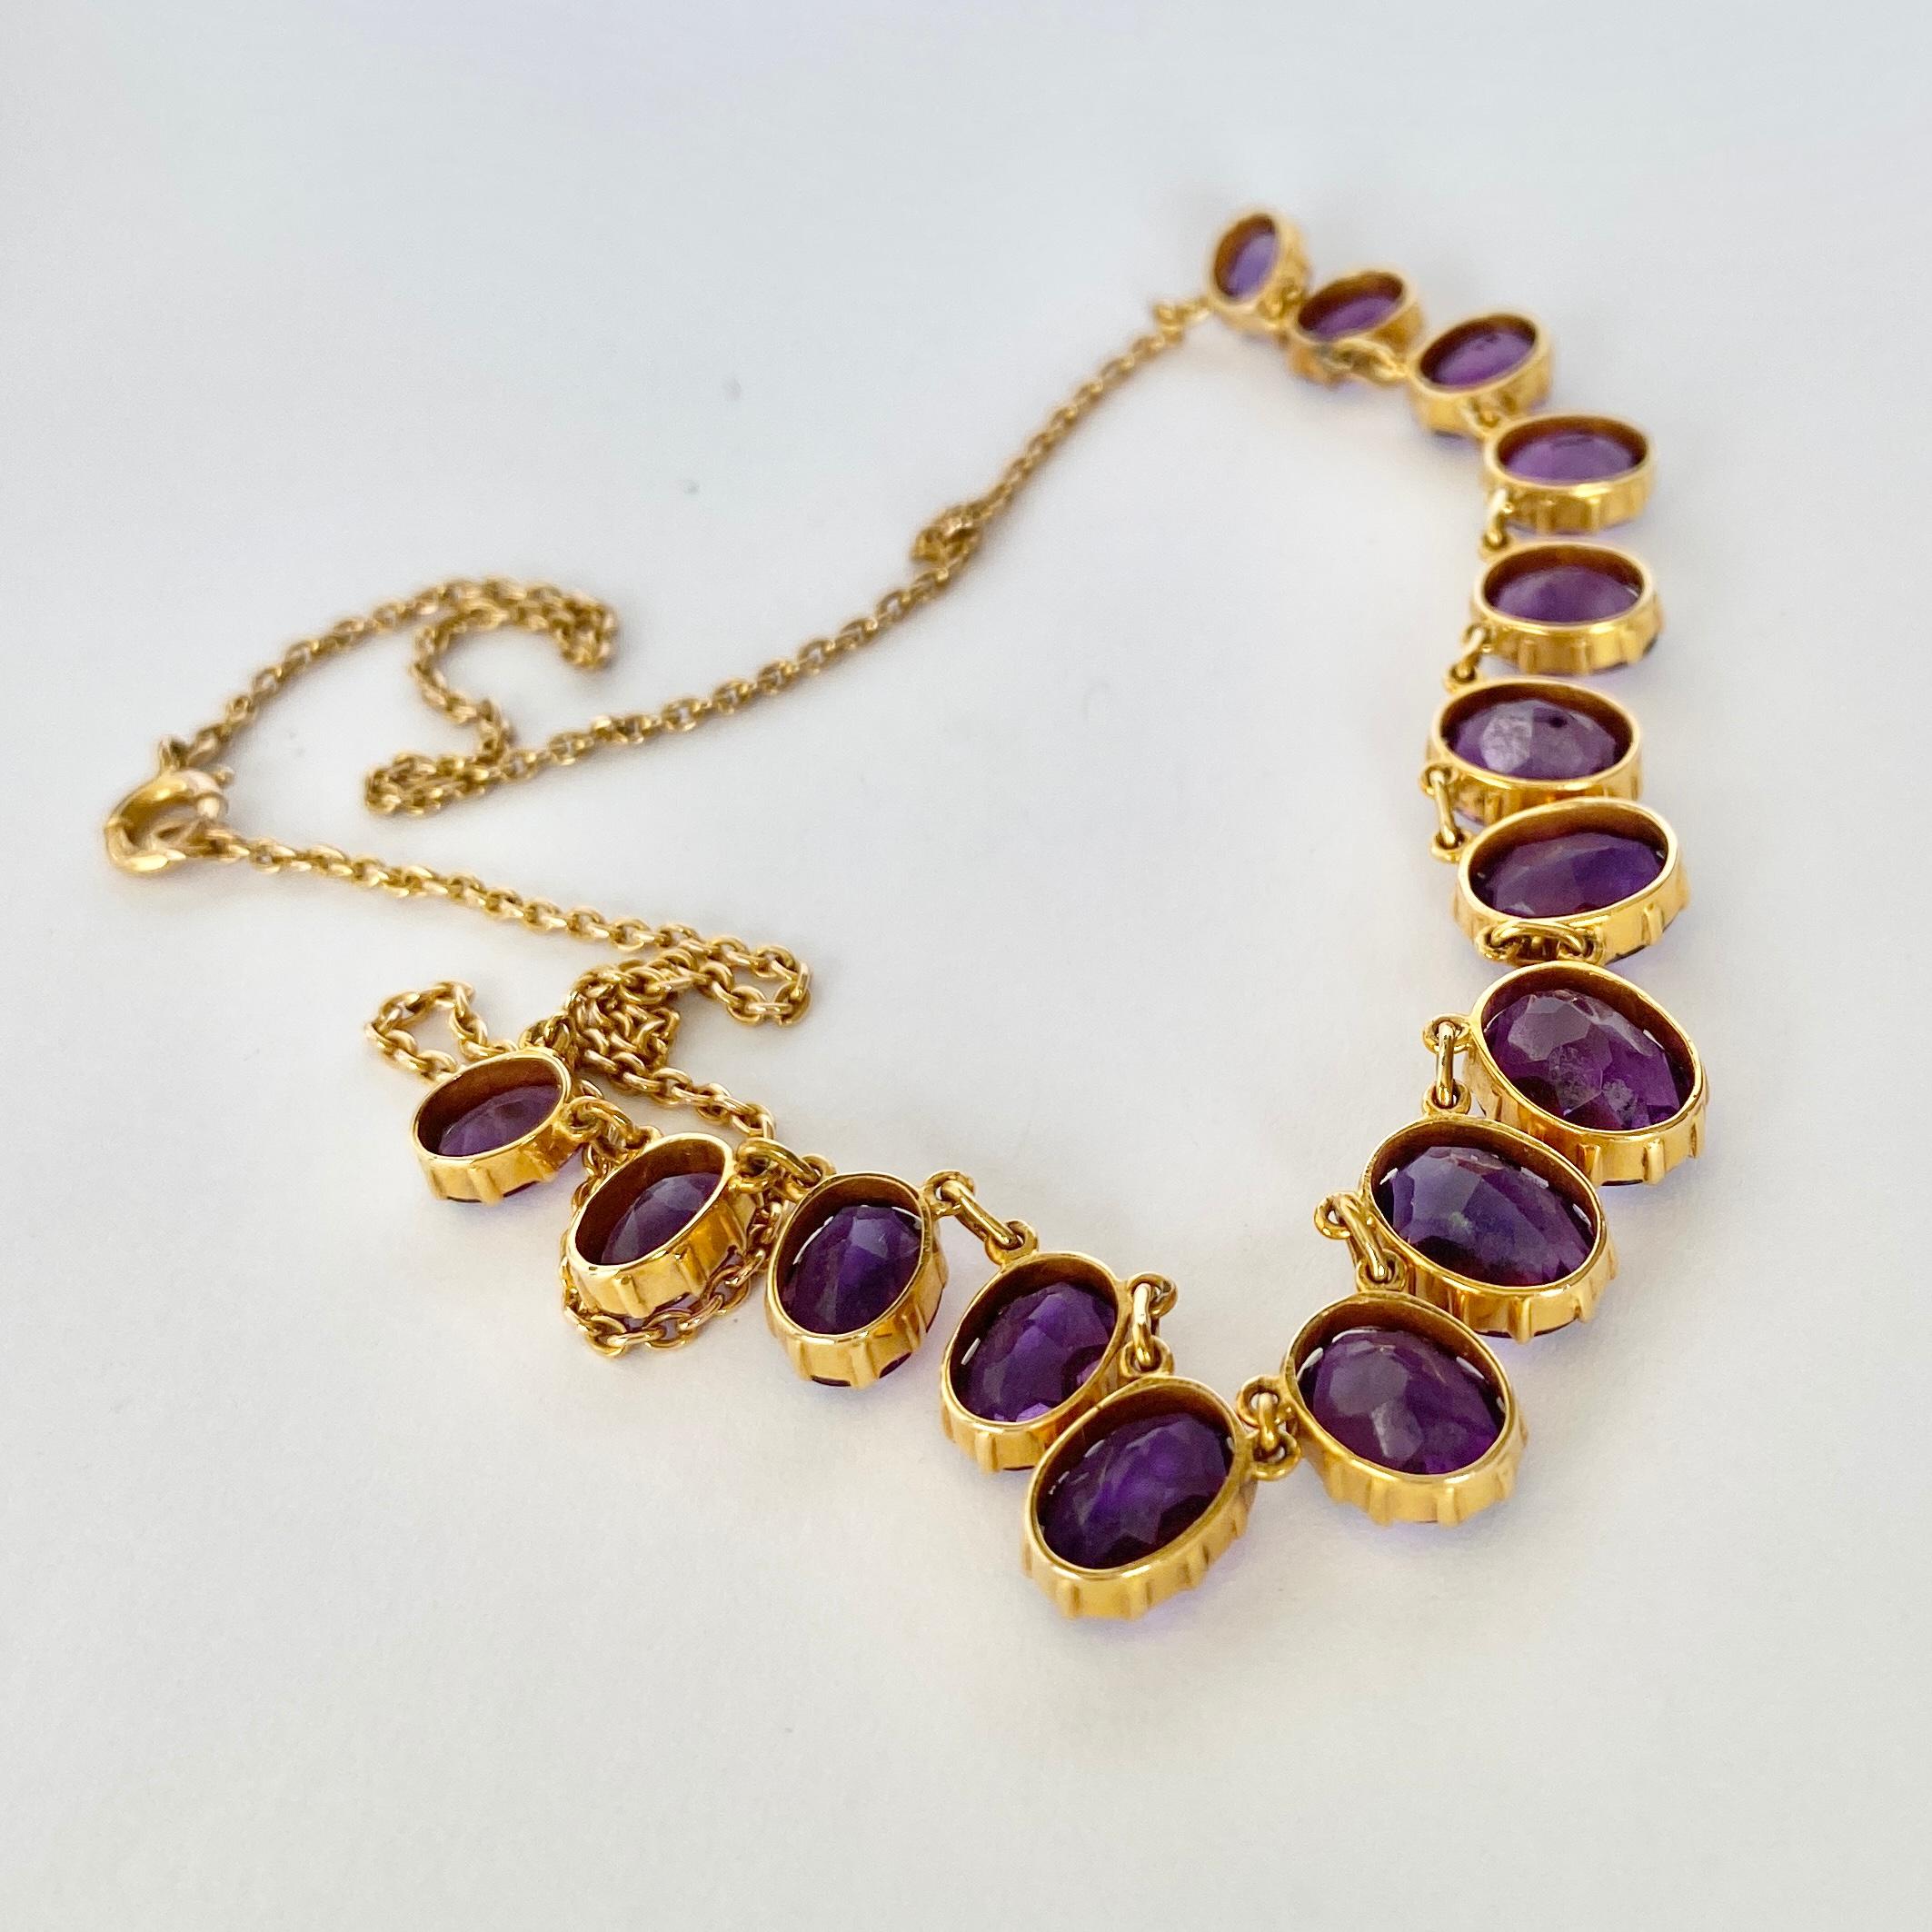 Fifteen stunning bright purple amethyst stones adorn this necklace. The largest stone measures 10x8mm and the smallest goes down to 6x4.5mm. The 15ct gold chains delicate compared to the chunky stones and is fastened using a classic bolt